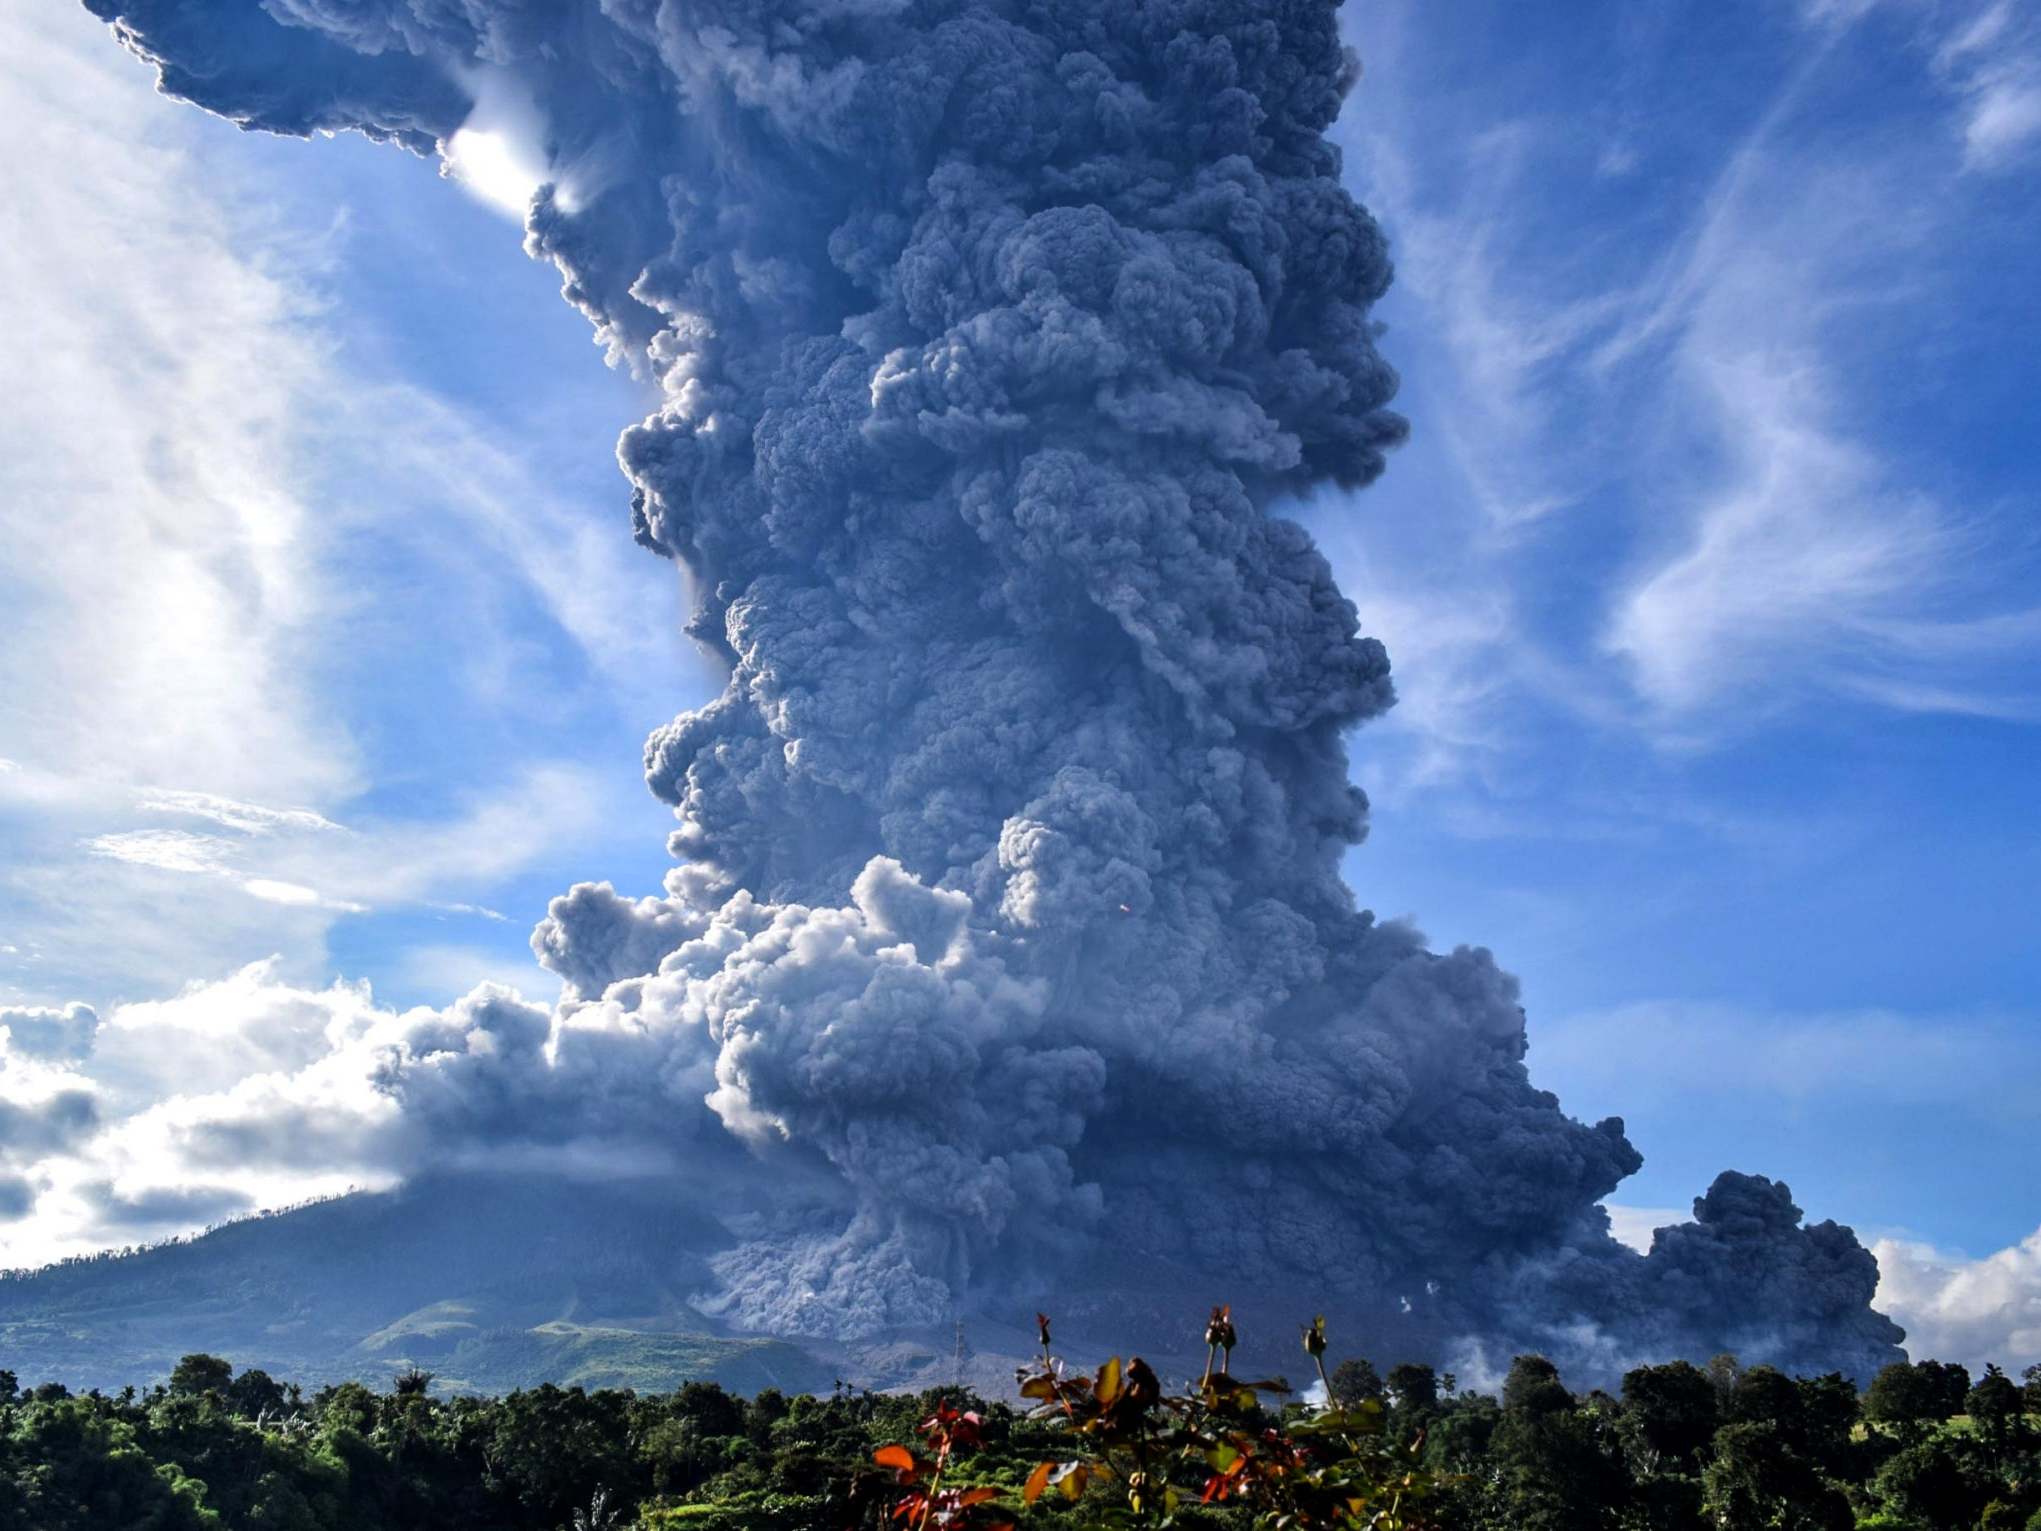 Indonesia: Levotolo volcano erupts - No injuries or damage reported